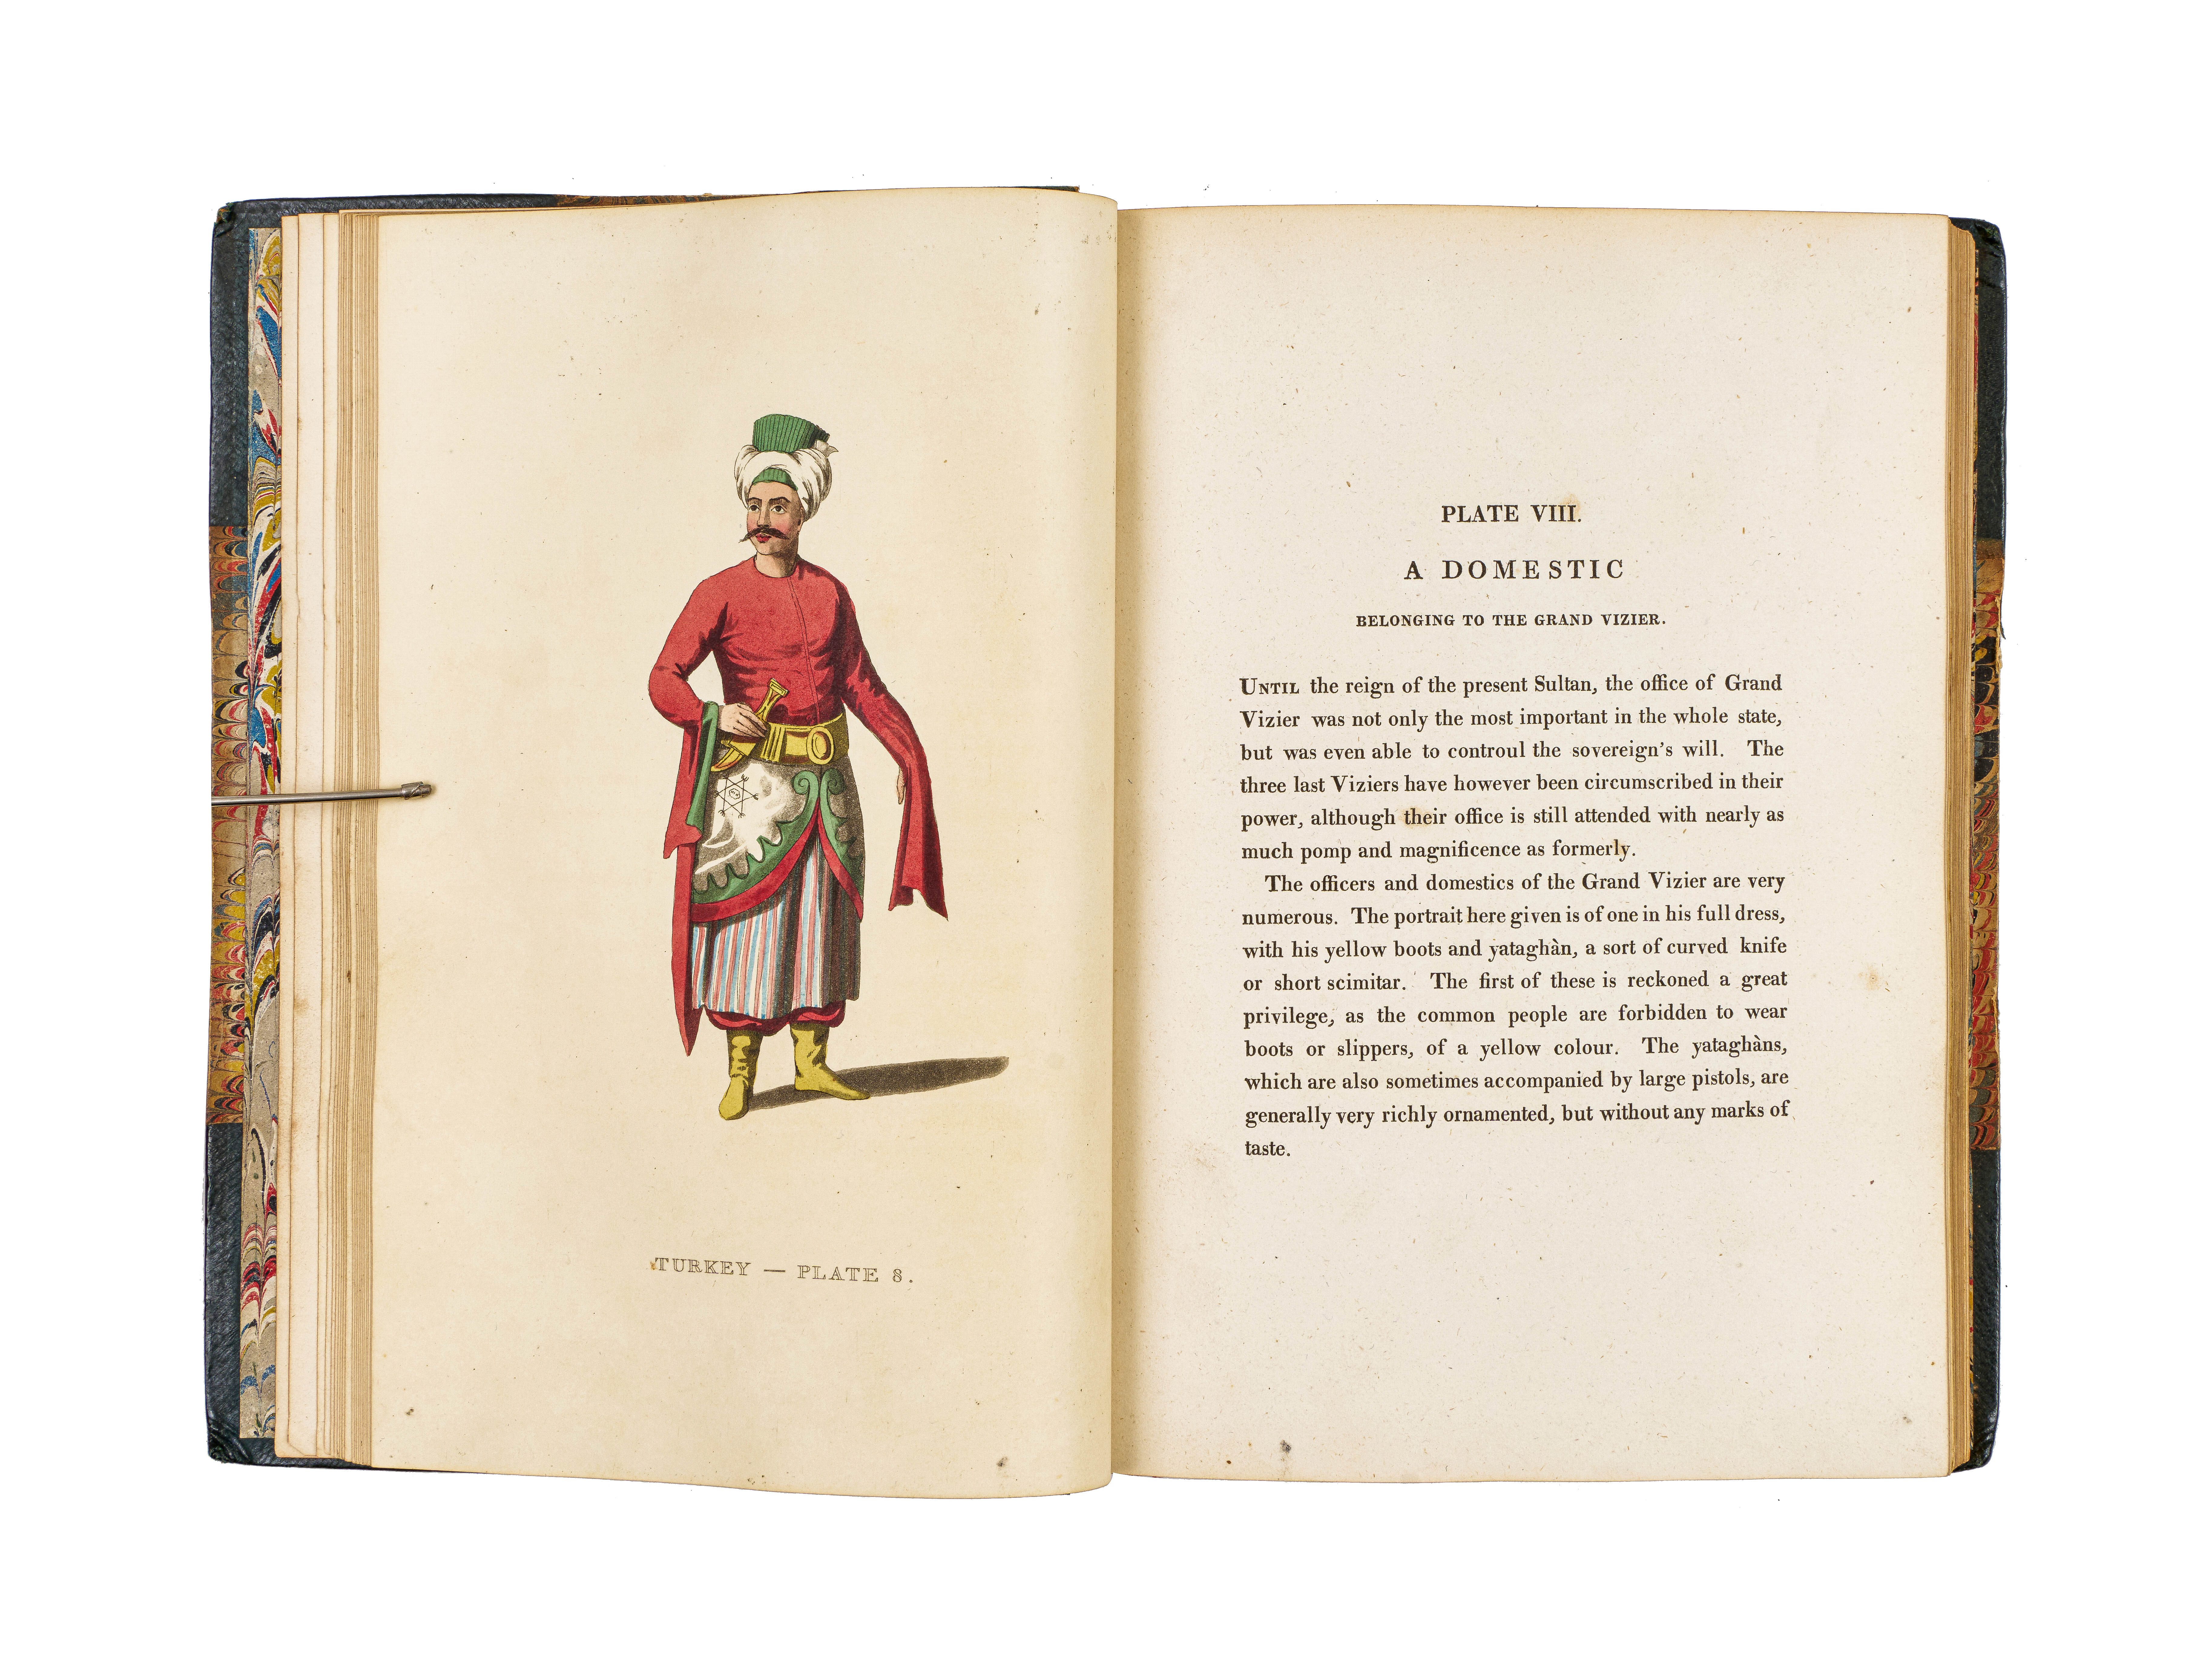 COSTUMES TURKEY, PICTURESQUE REPRESENTATIONS OF THE DRESS AND MANNERS OF THE TURKS, JOHN MURRAY, LON - Image 6 of 8